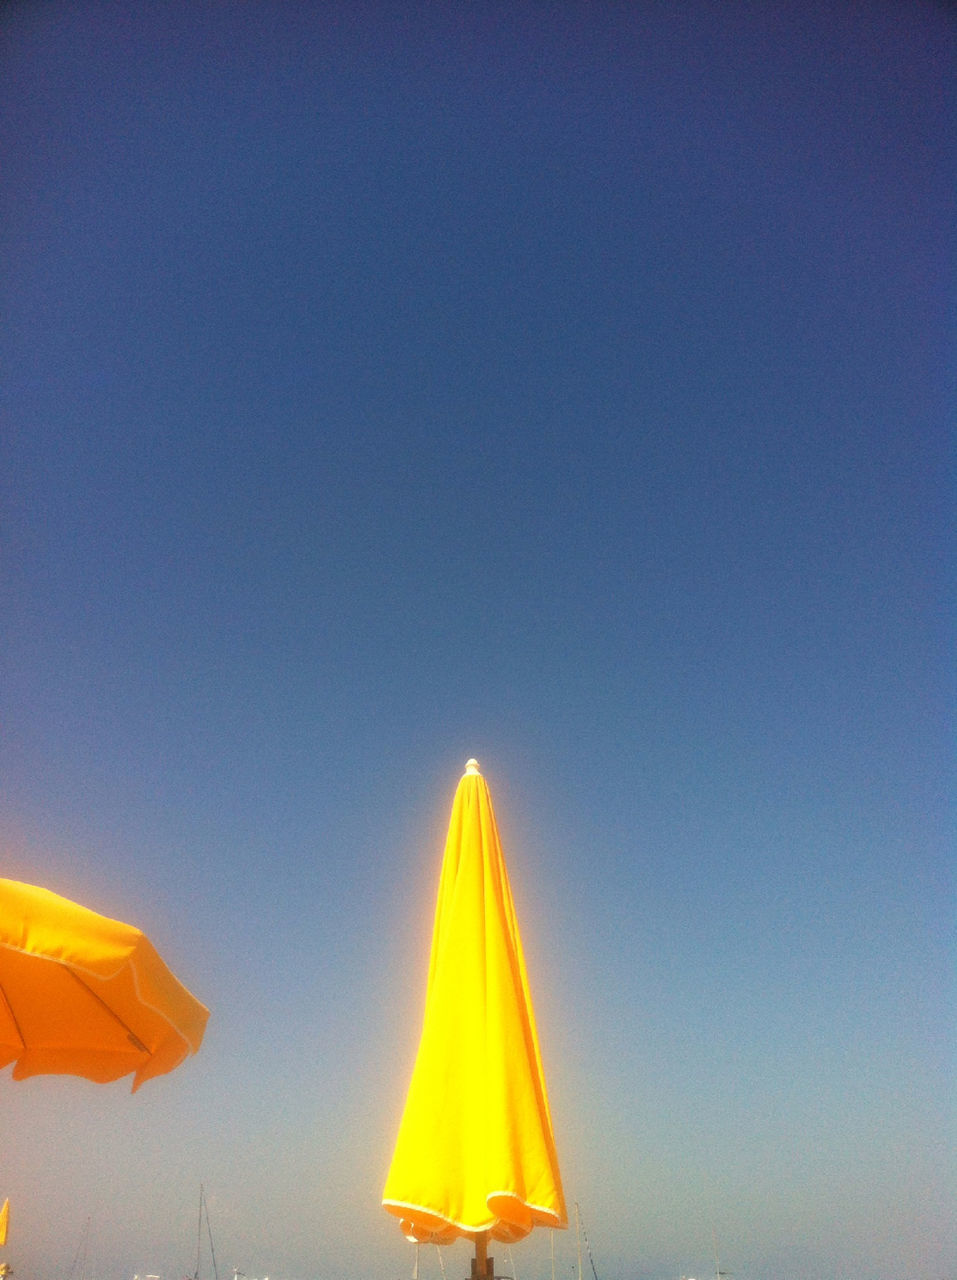 Yellow sunshades against the blue sky